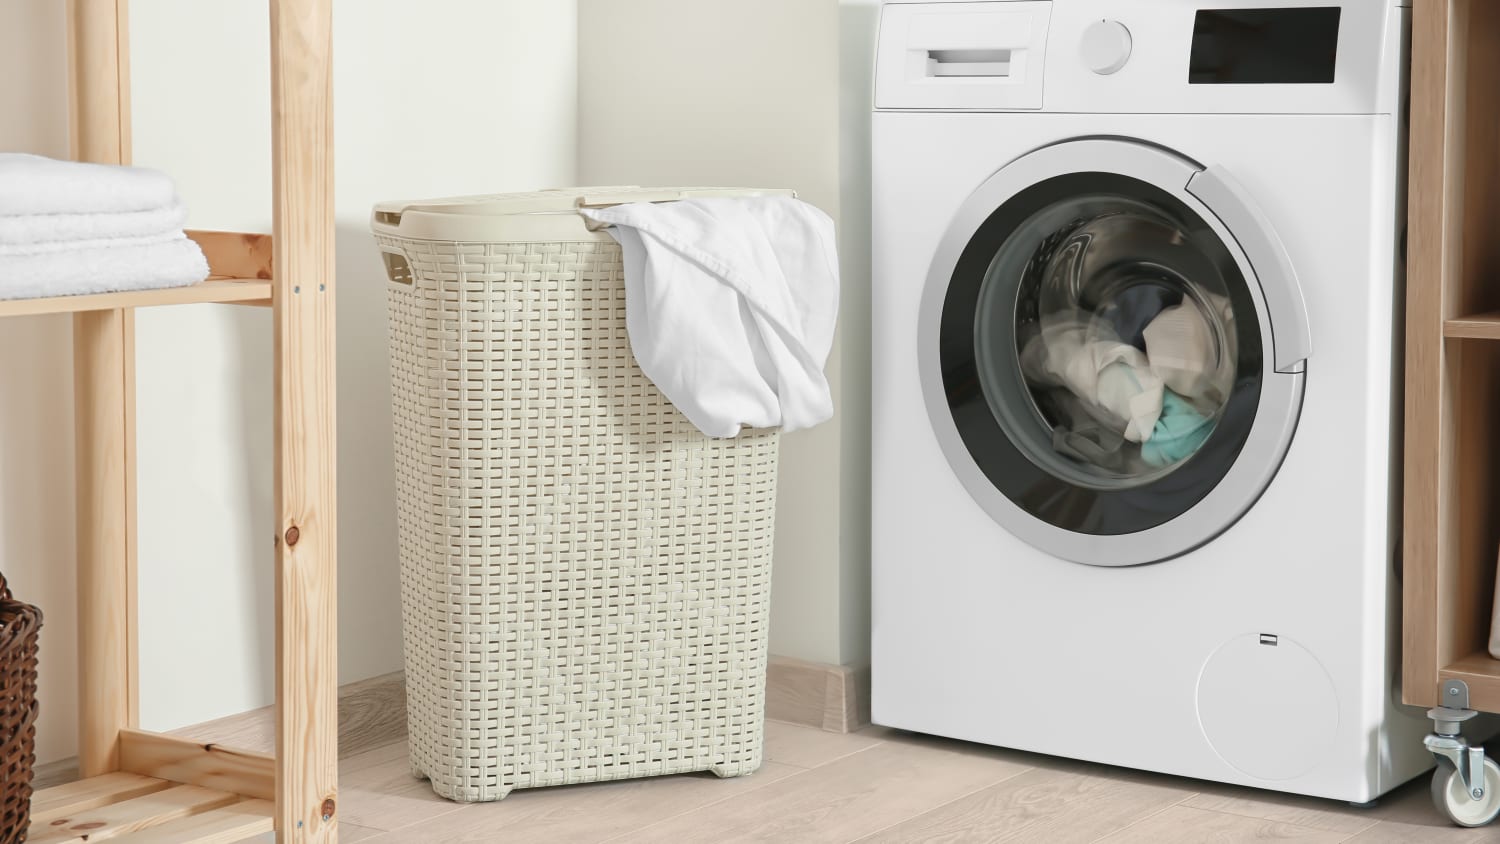 How Long Can Laundry Sit in the Washer?